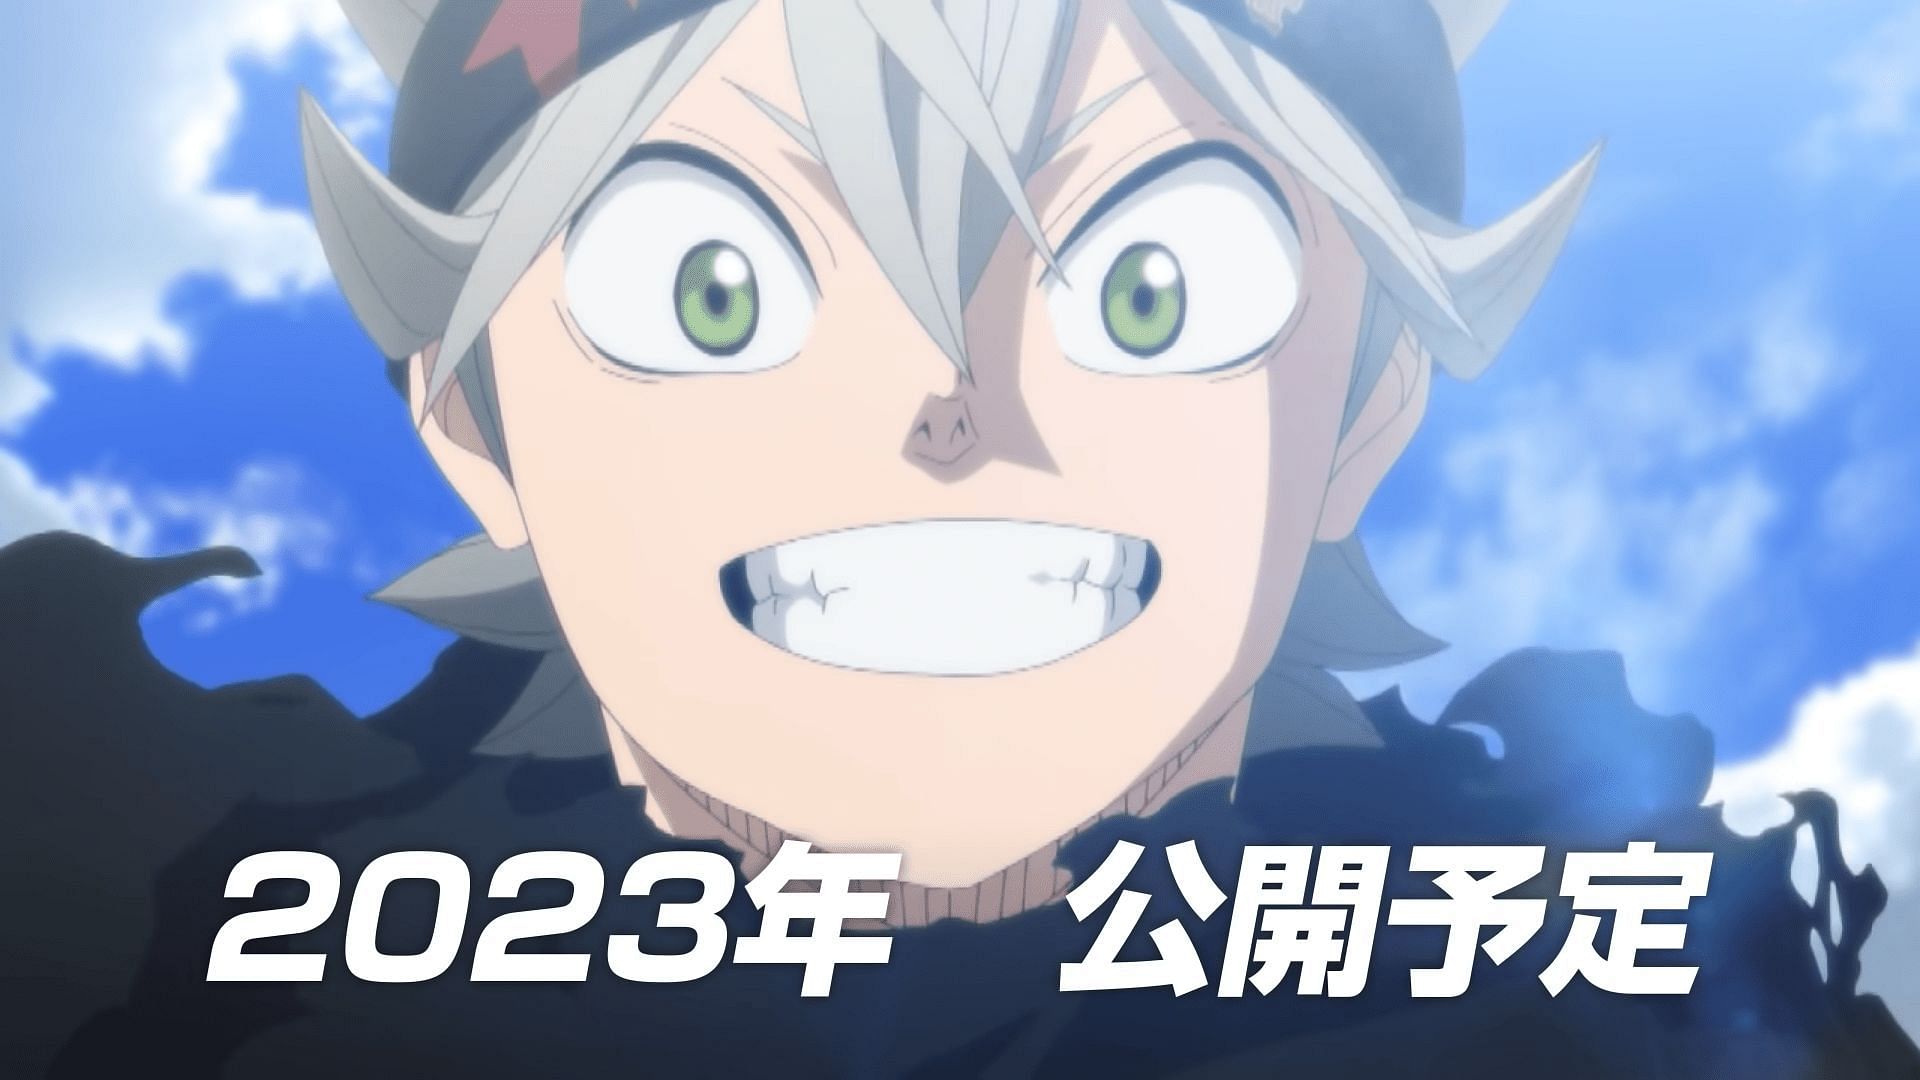 A snapshot of the release date trailer for the series&#039; film (Image via Studio Pierrot)